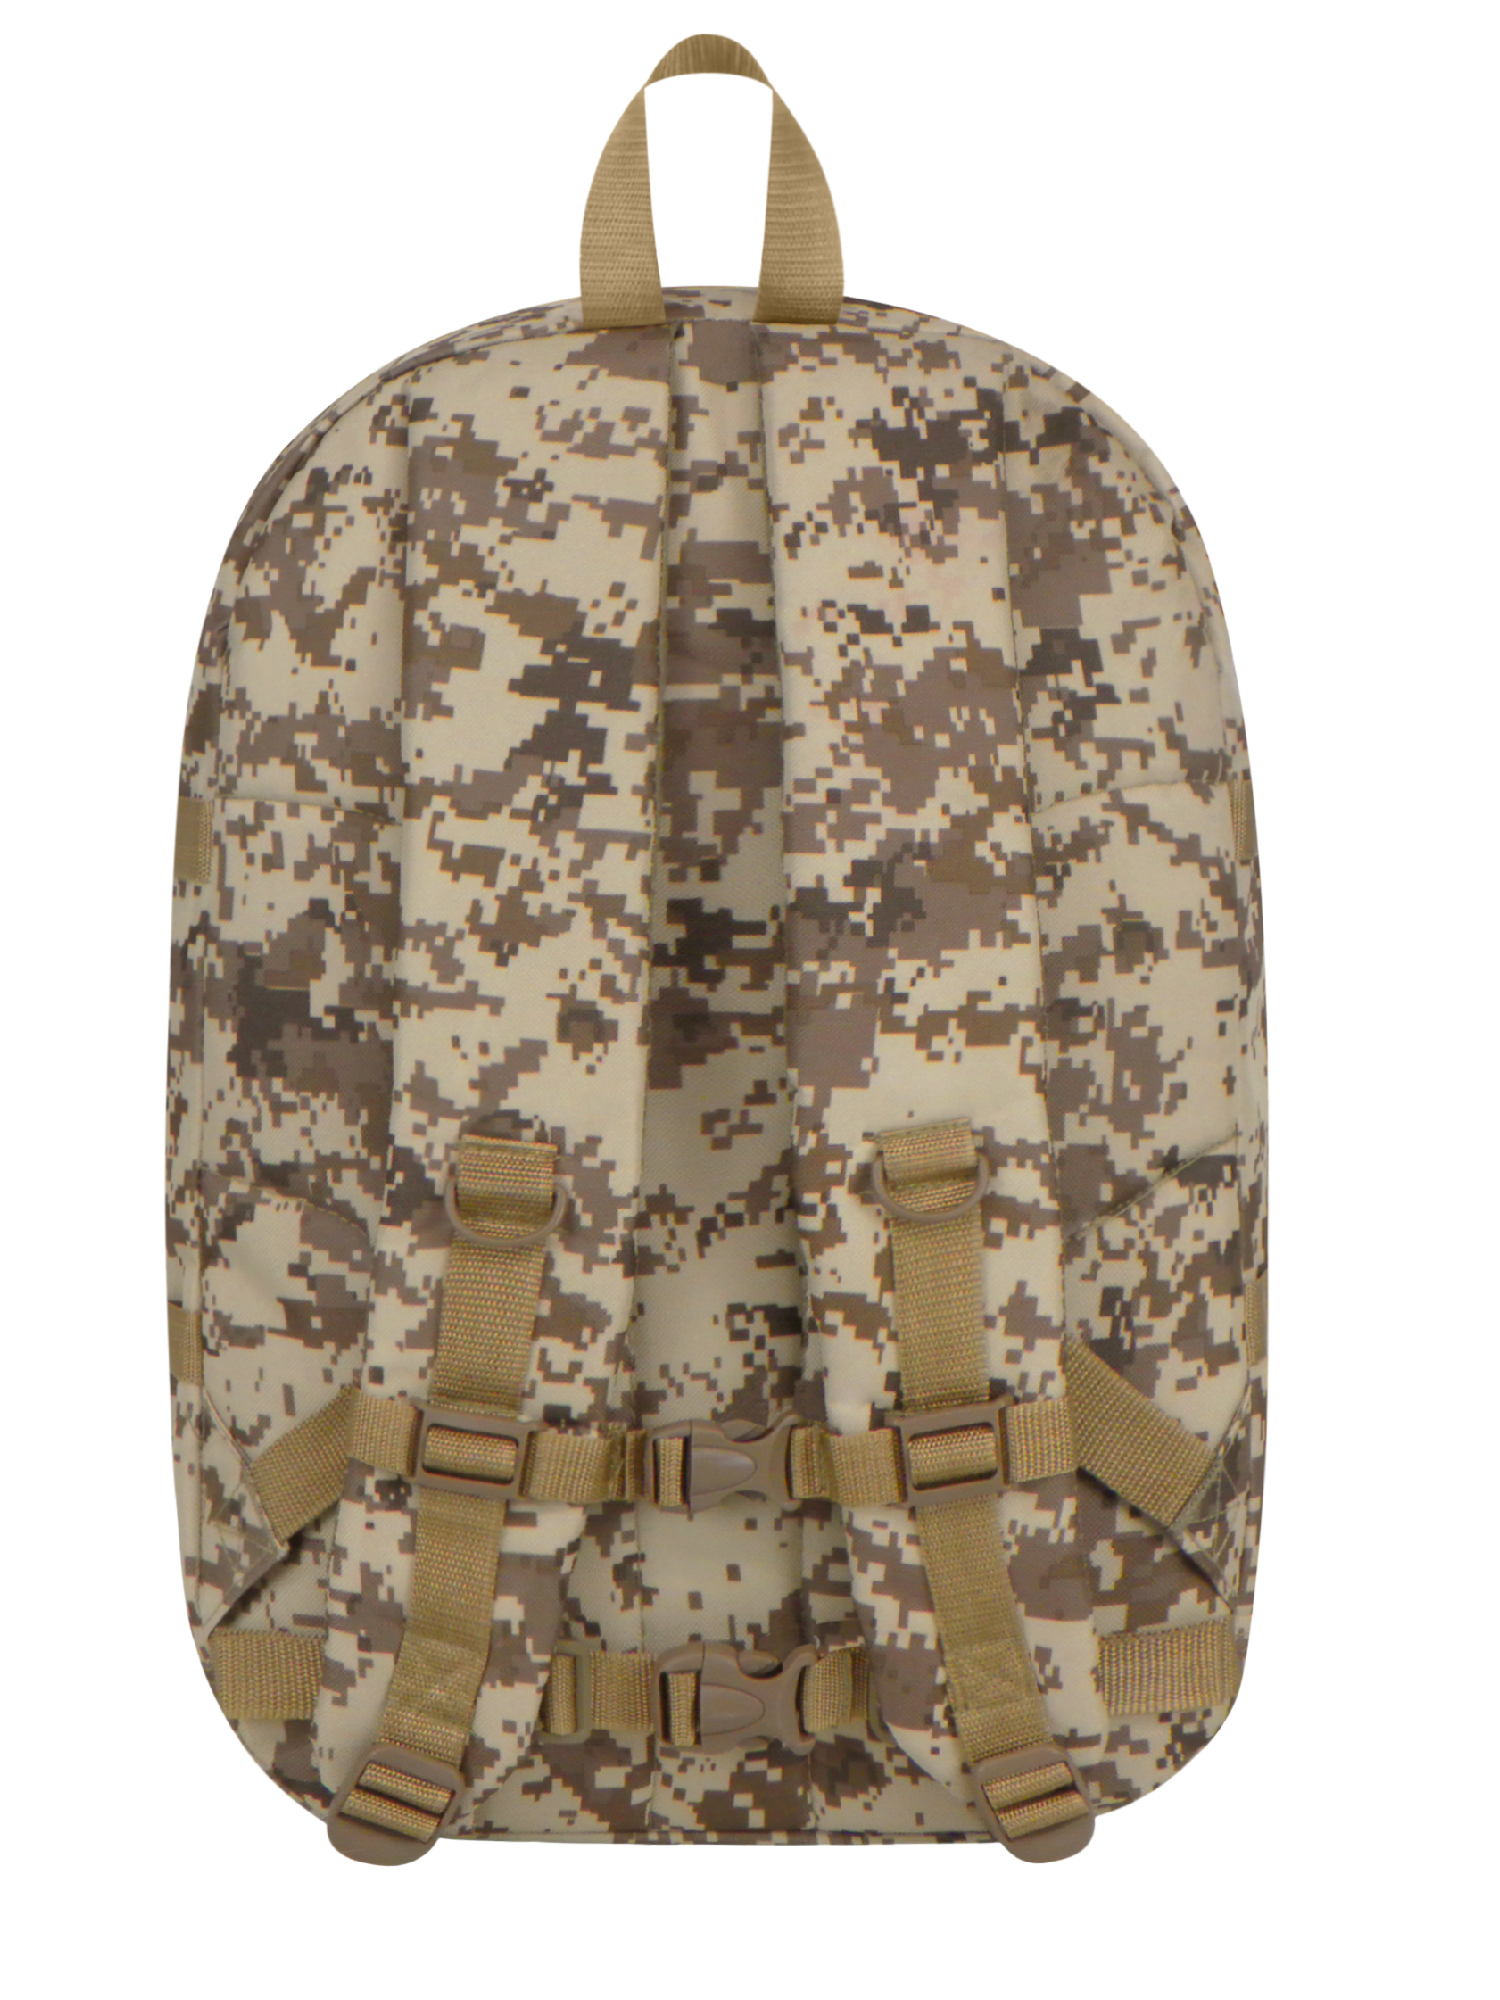 Commuter Camo Backpack - Tan ACU - image 3 of 3